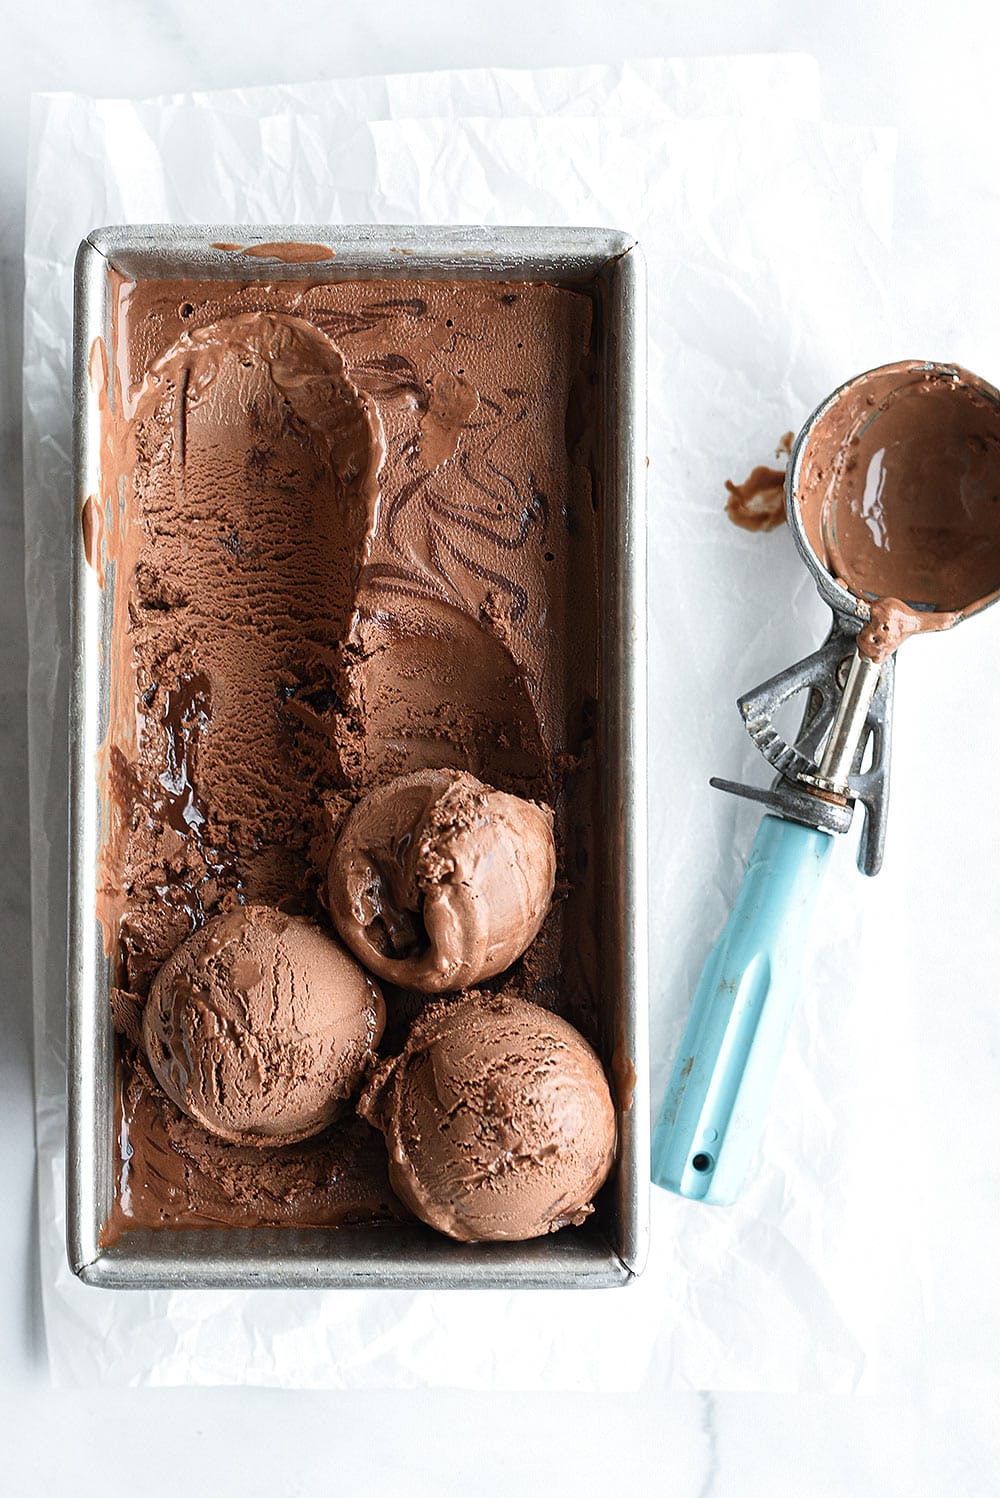 scoops of homemade chocolate ice cream in an ice cream tin with a blue ice cream scooper